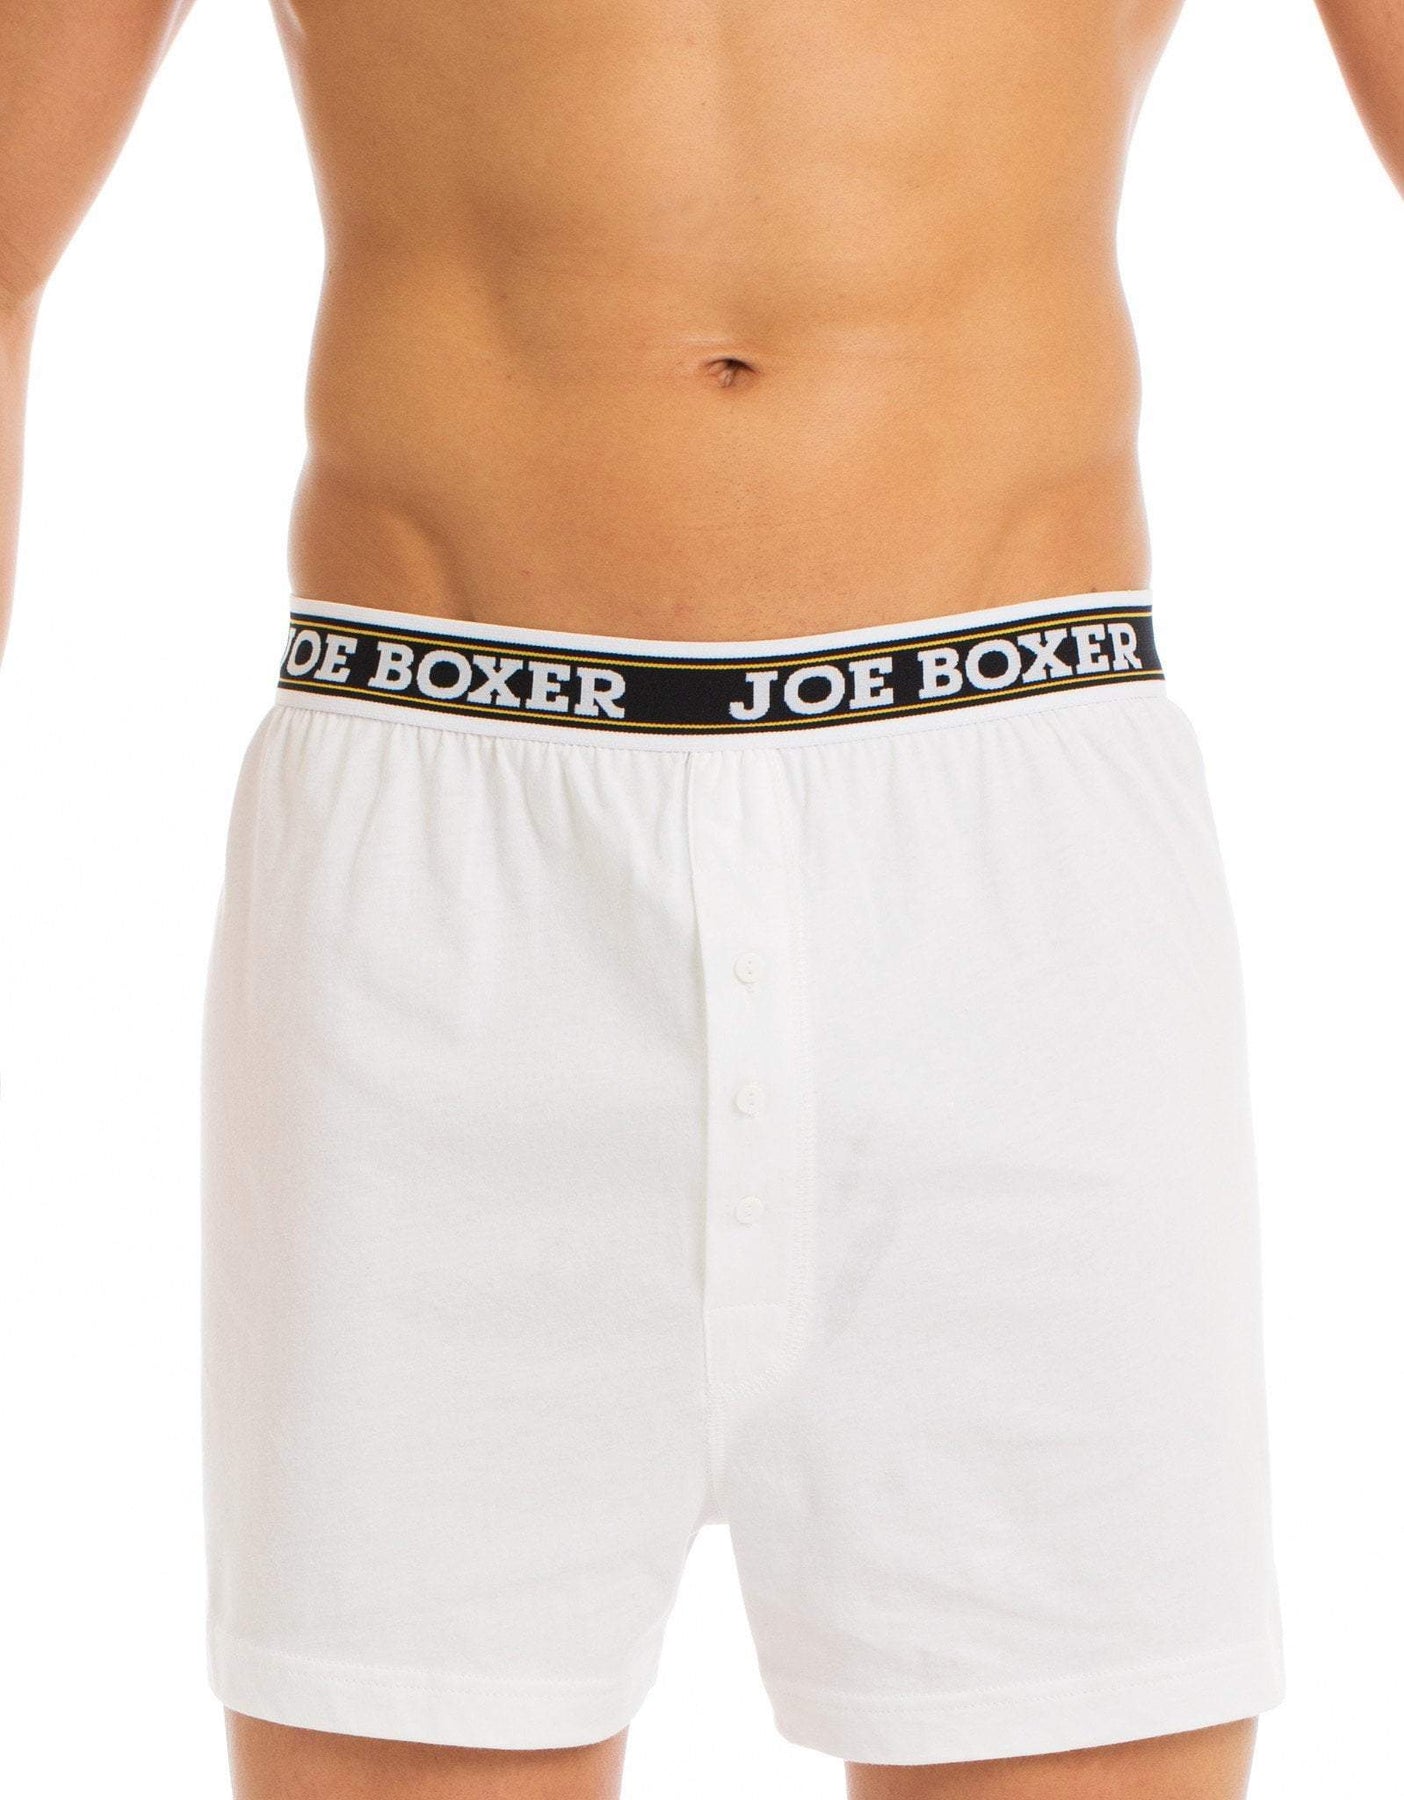 Men's White Traditional Fit Oxford Boxers